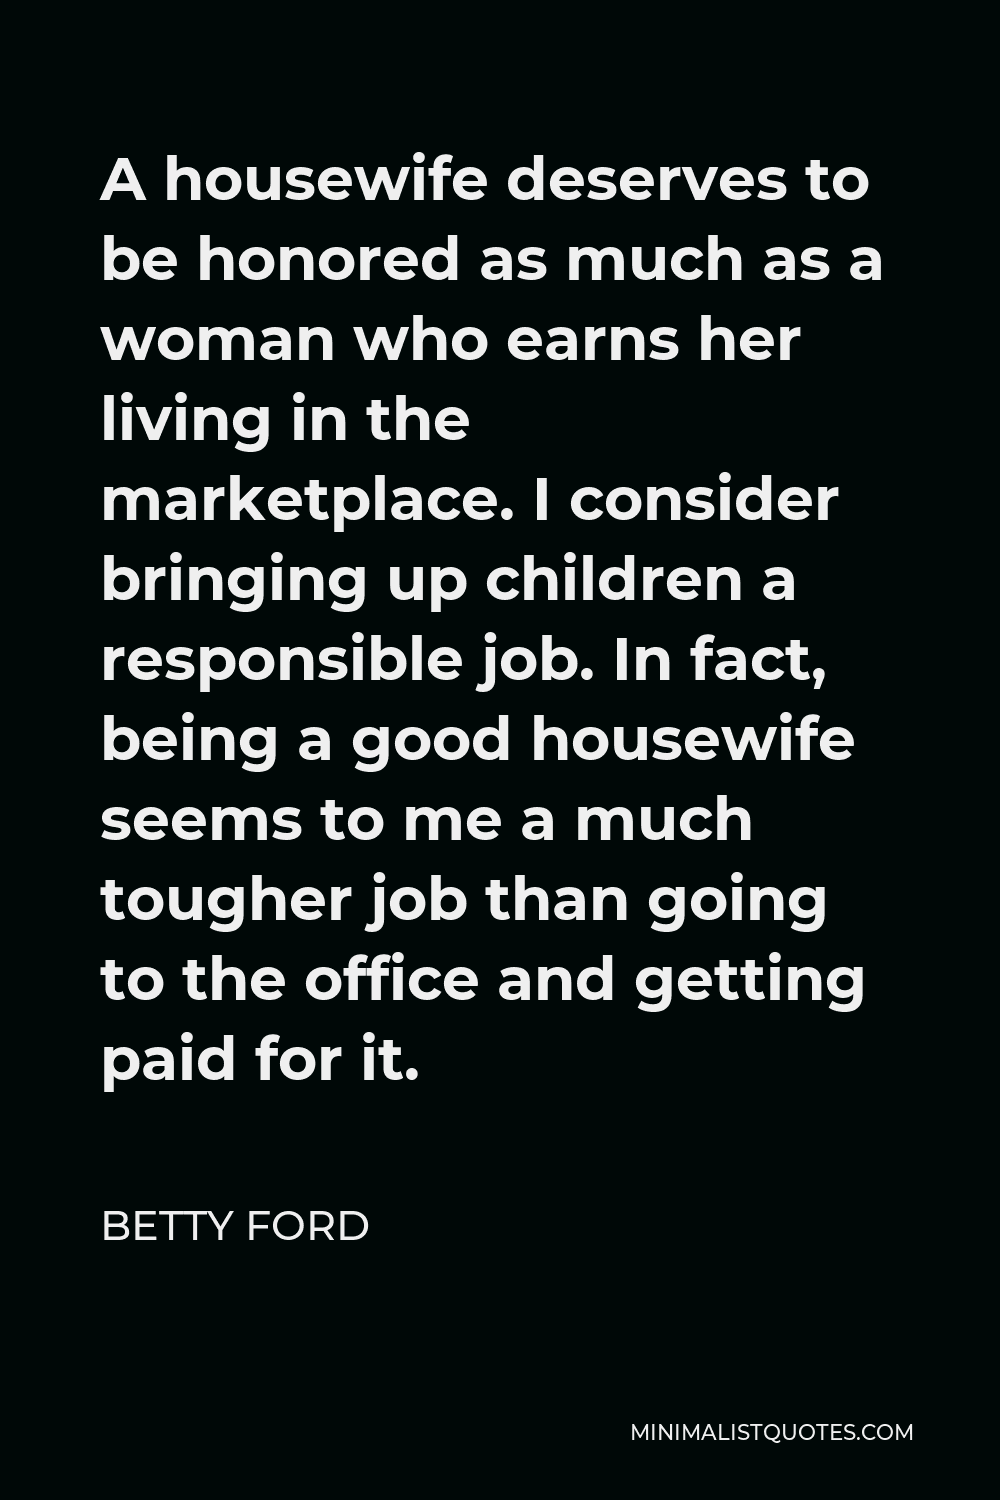 Betty Ford Quote - A housewife deserves to be honored as much as a woman who earns her living in the marketplace. I consider bringing up children a responsible job. In fact, being a good housewife seems to me a much tougher job than going to the office and getting paid for it.